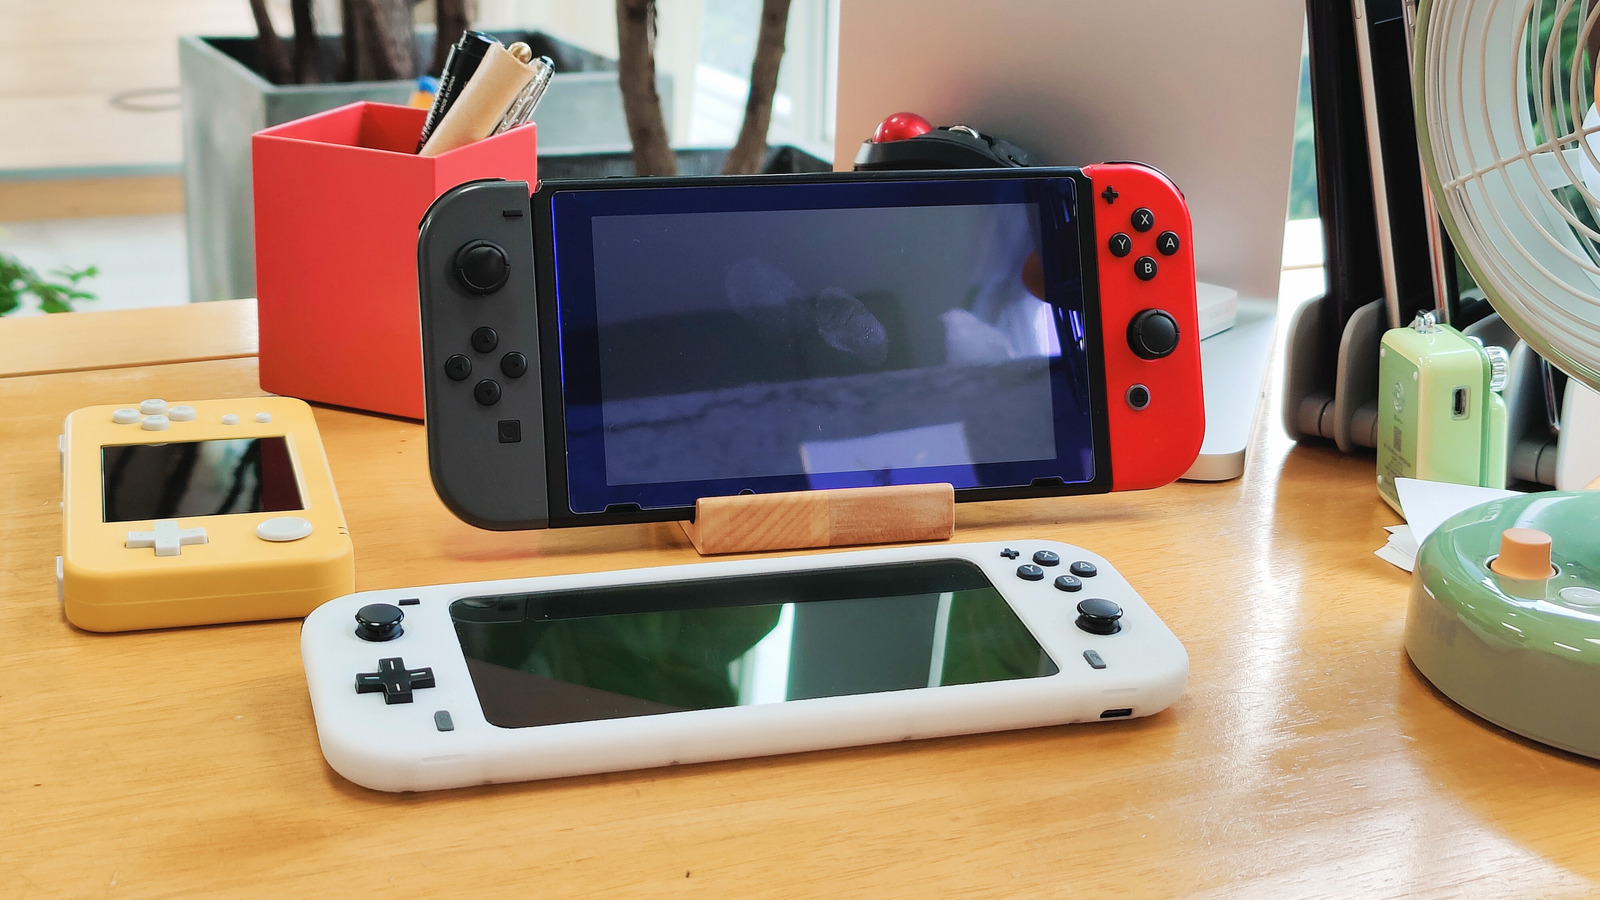 Here Are the Top 10 Games You Can Enjoy on Your Nintendo Switch